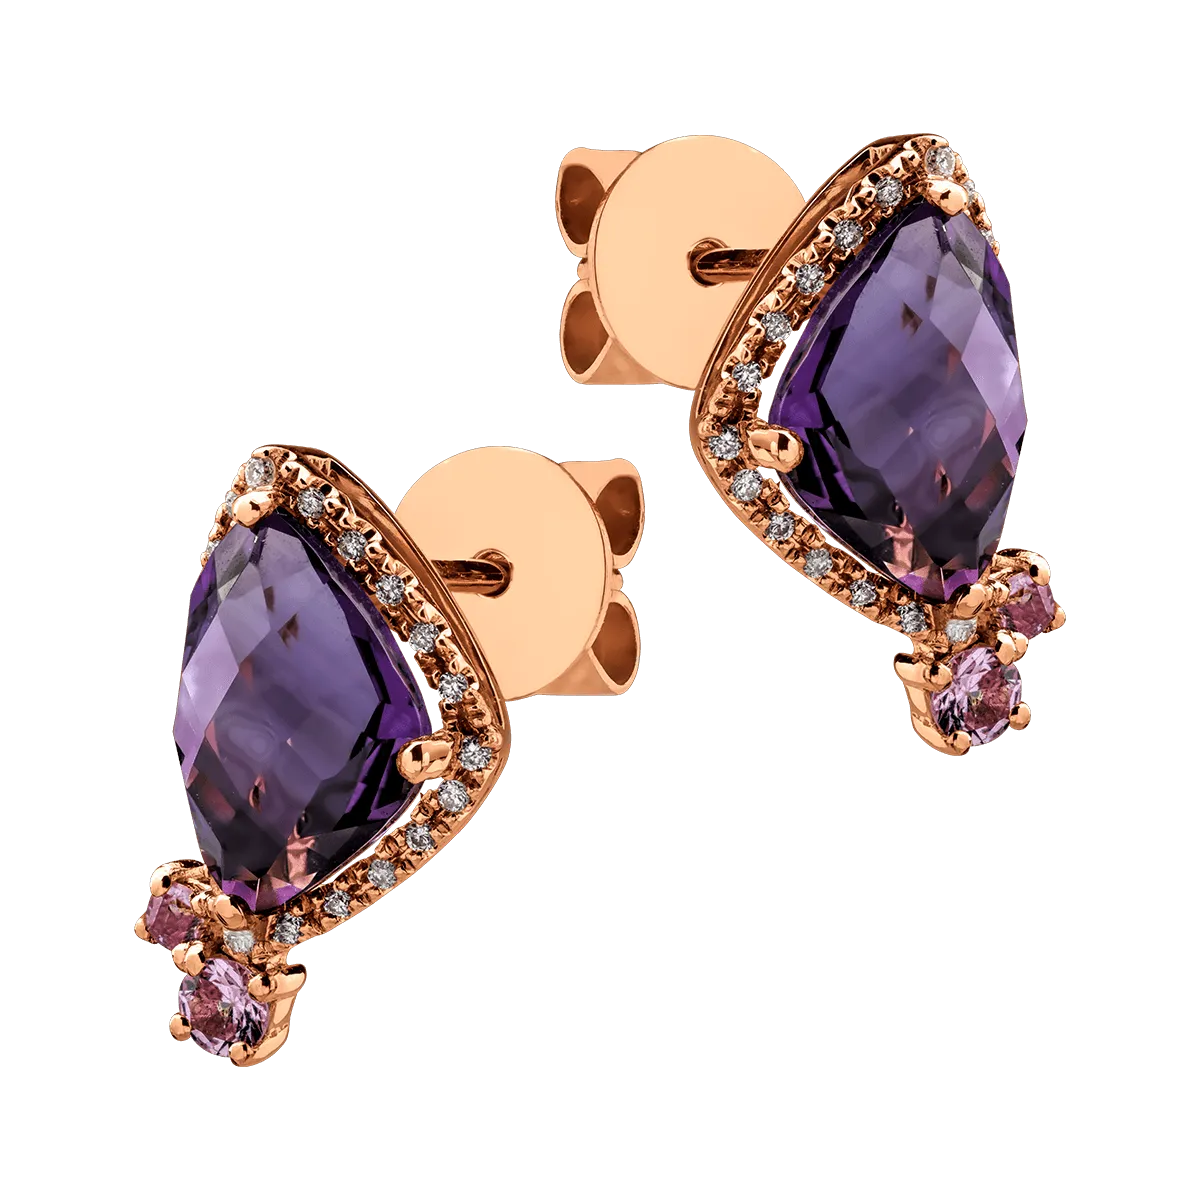 18K rose gold earrings with 4.36ct precious and semiprecious stones